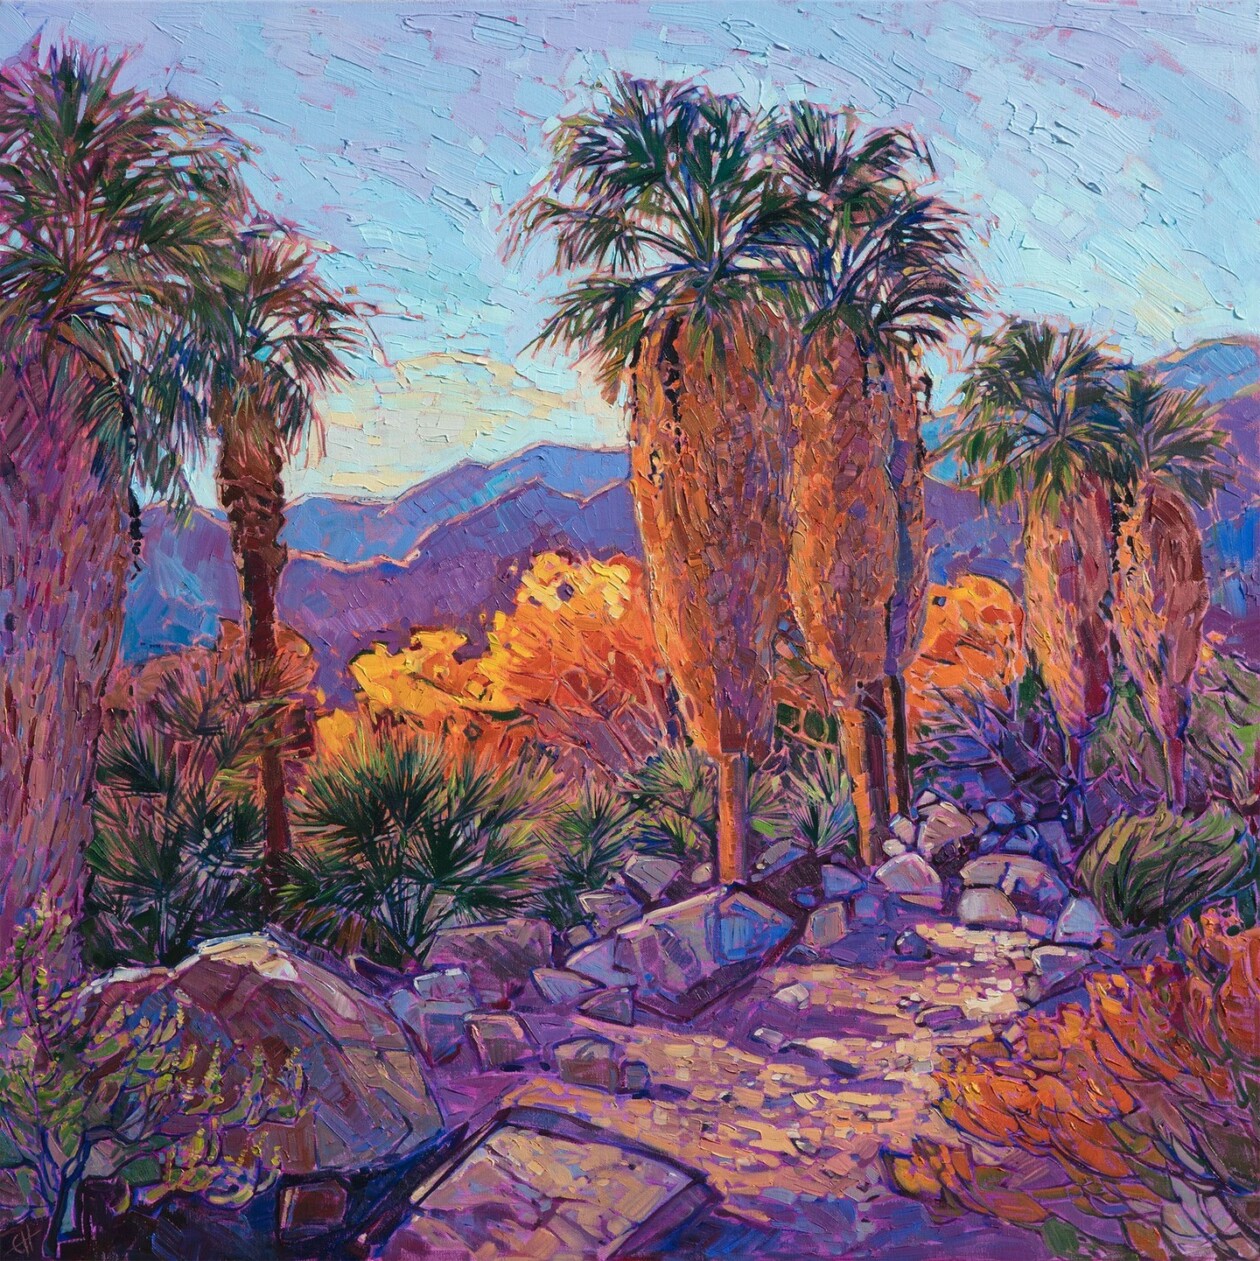 Explosions Of Colors, Vibrant Nature Paintings By Erin Hanson (11)